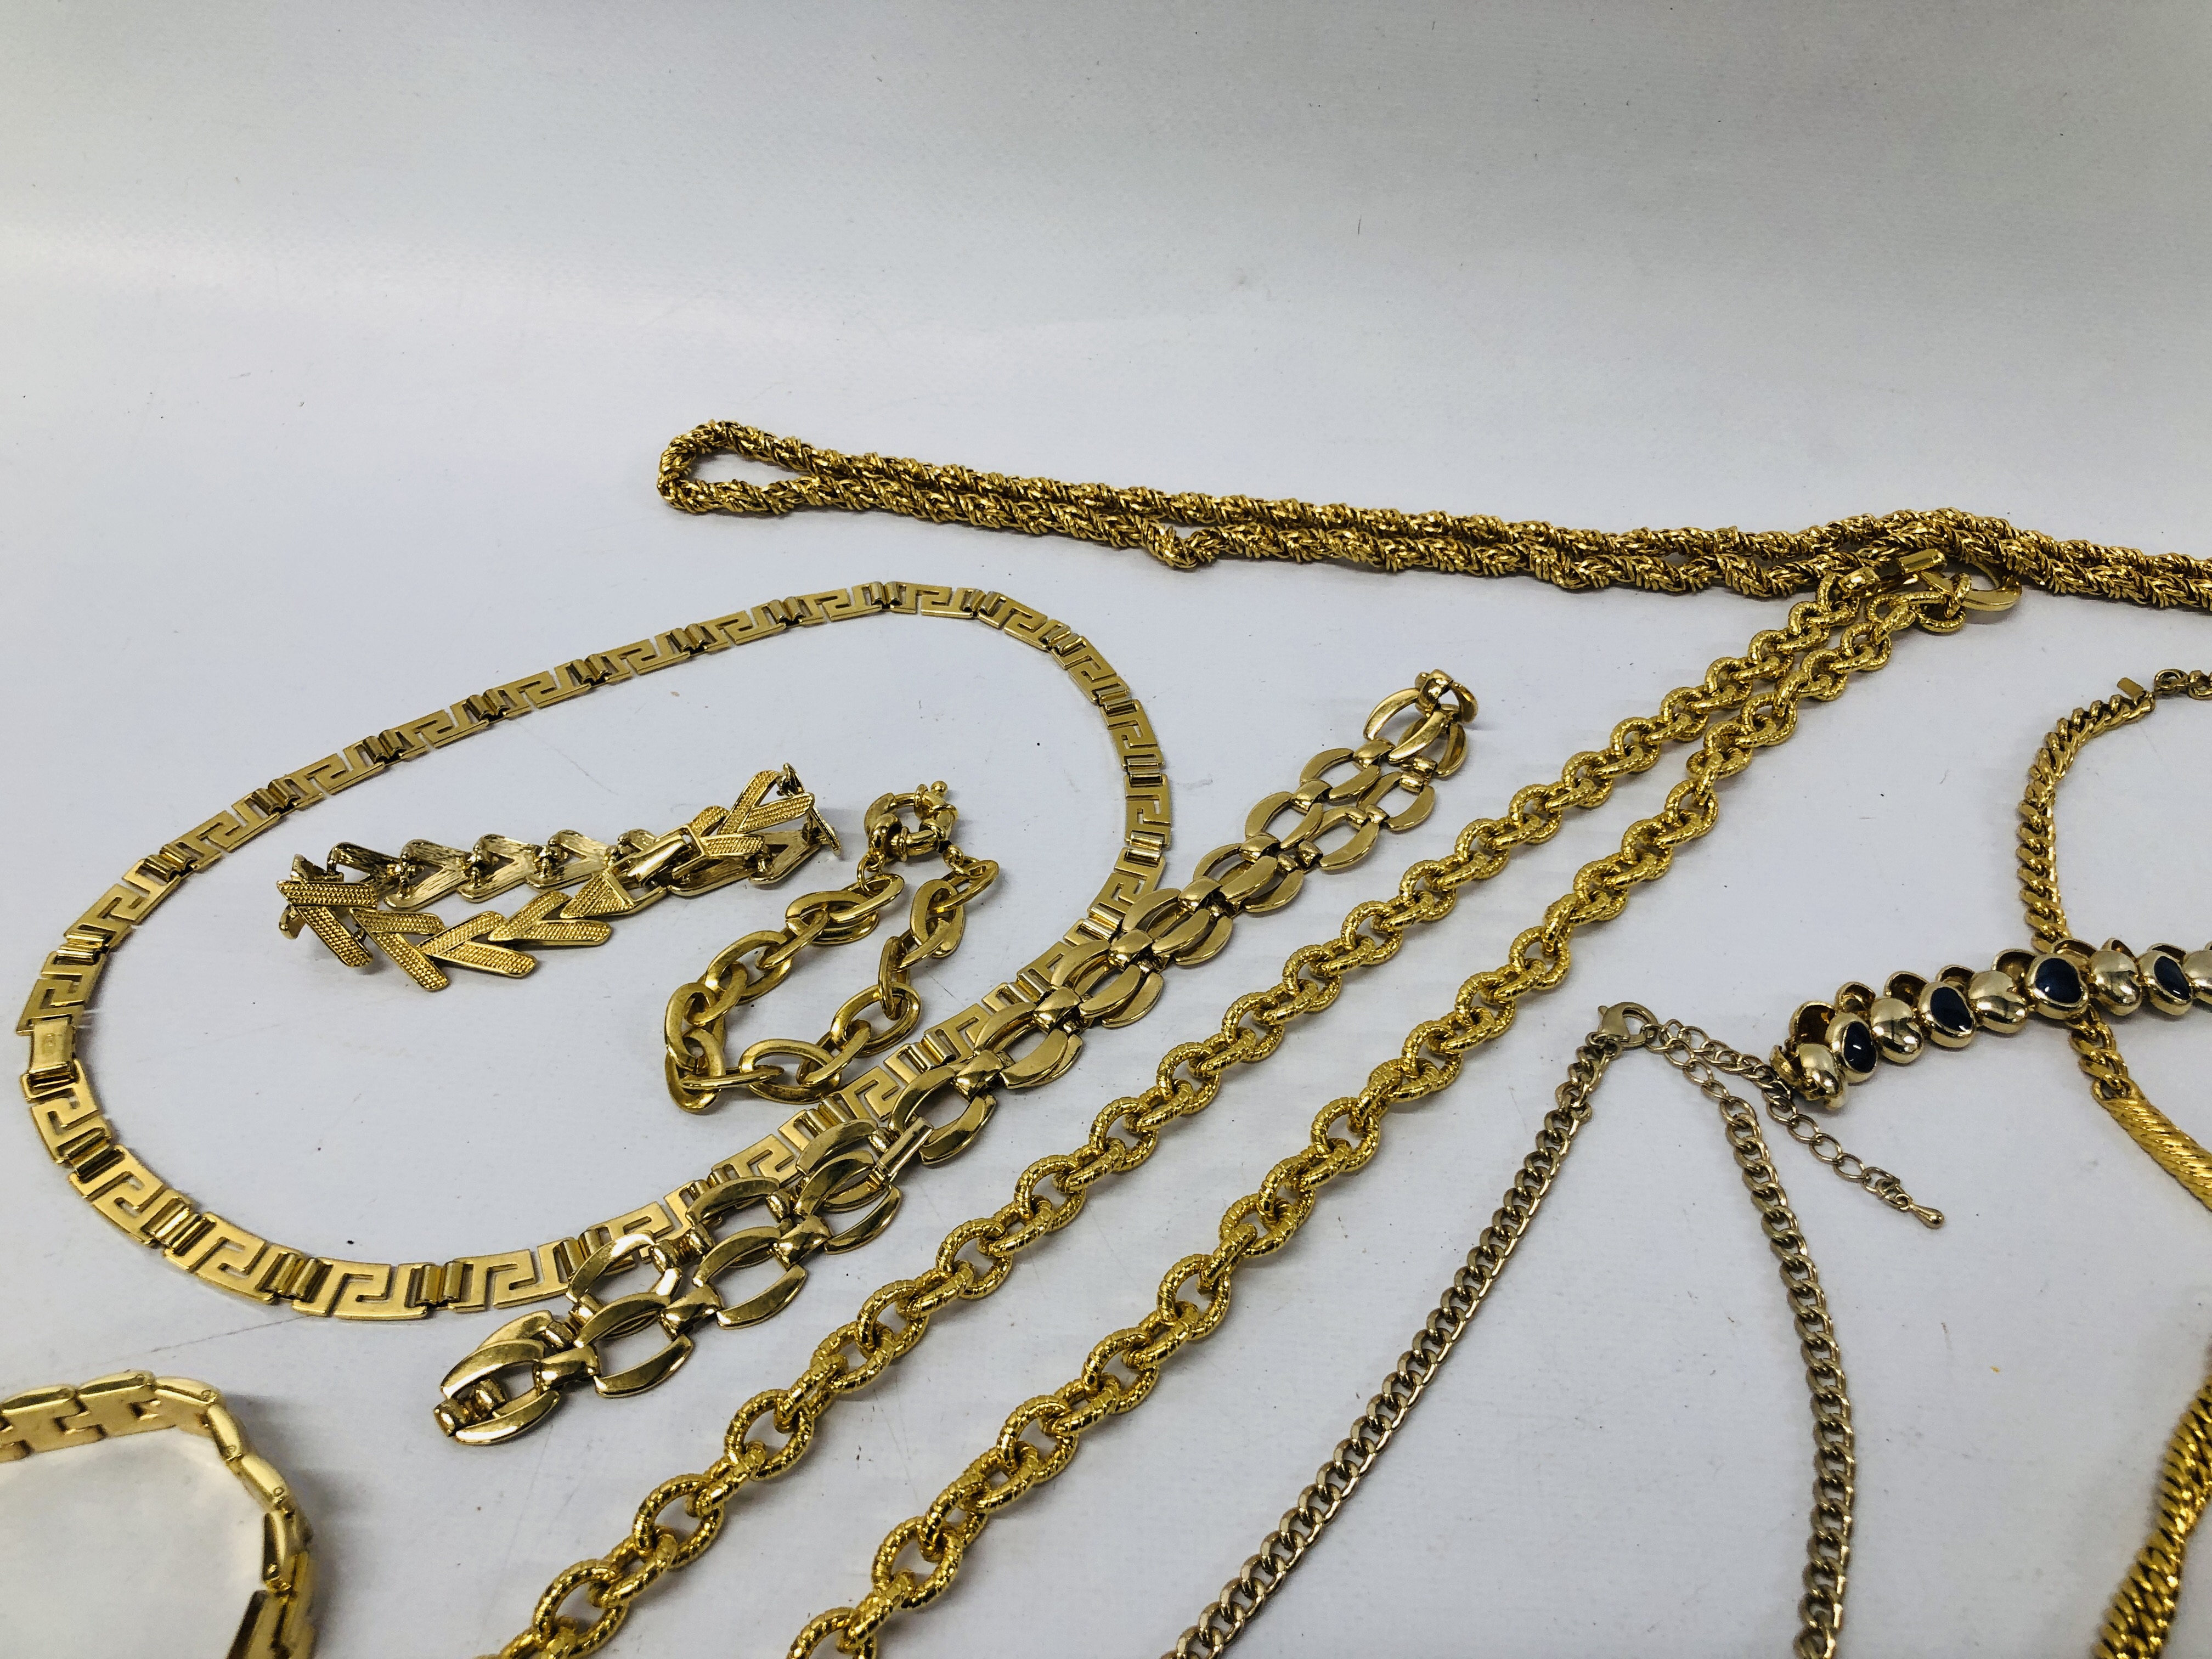 COLLECTION OF DESIGNER COSTUMER JEWELLERY, NECKLACES OF GOLD COLOUR VARIOUS DESIGNS AND LENGTH. - Image 4 of 6